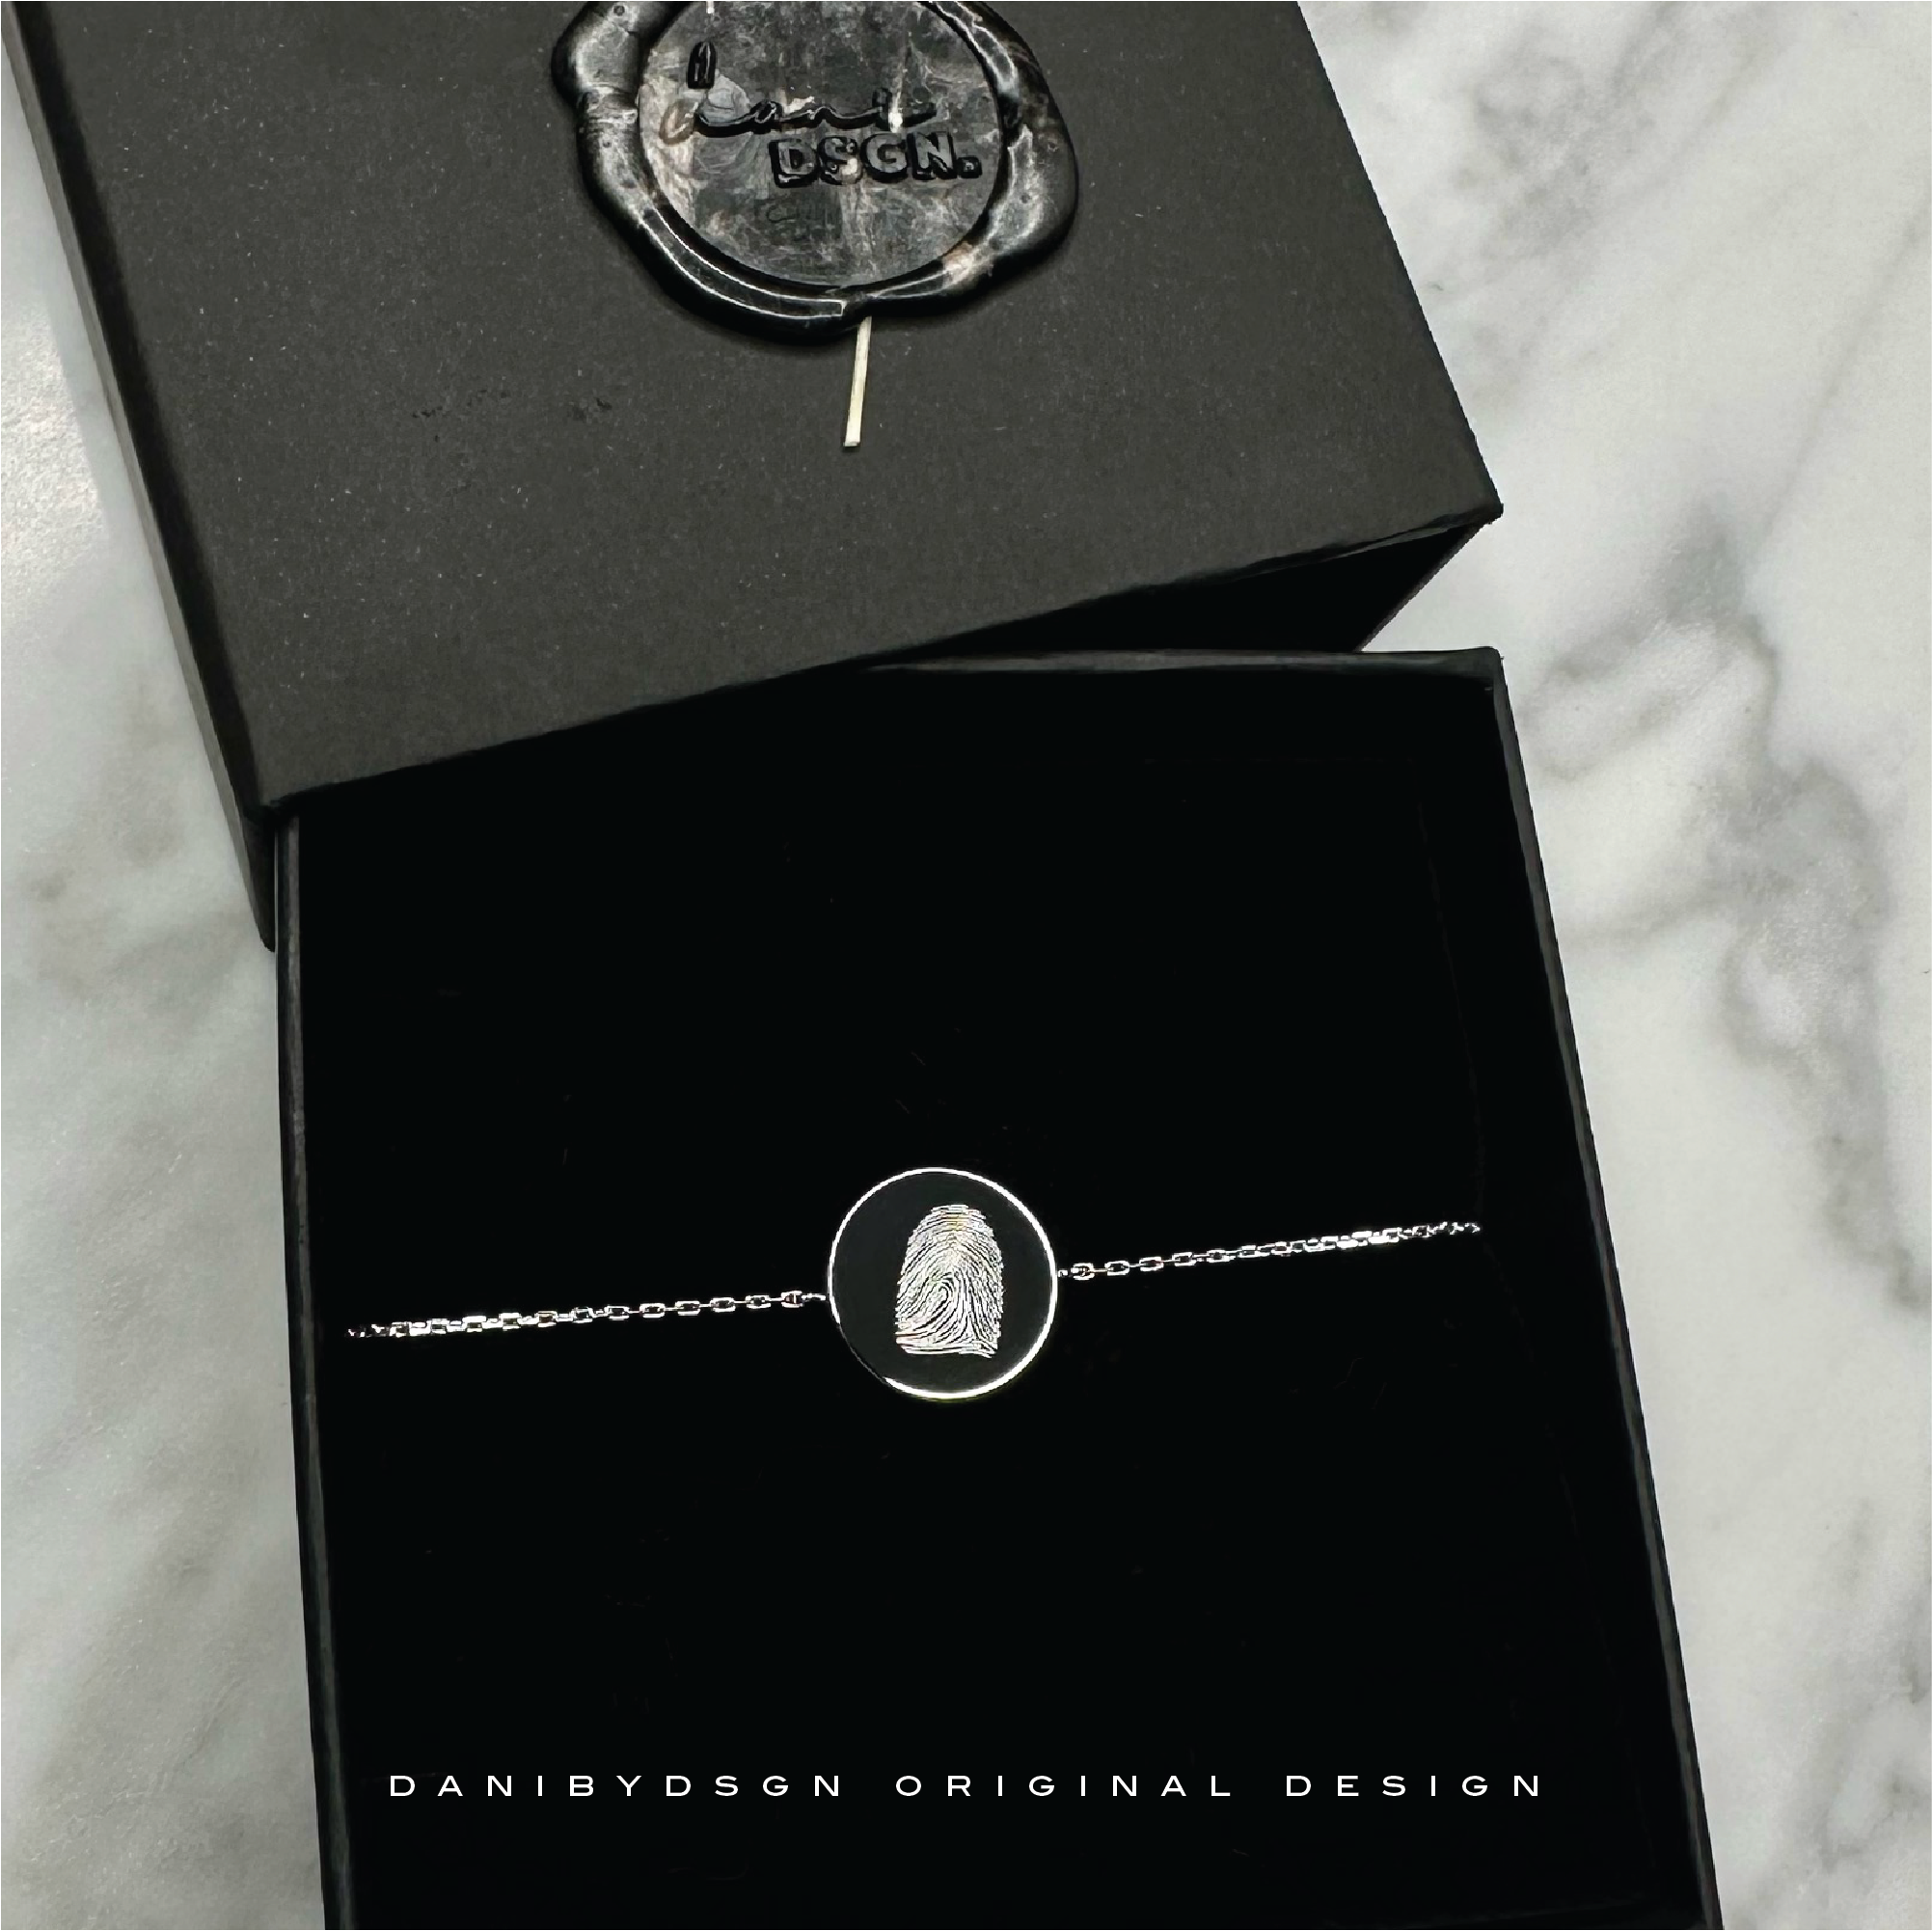 A unique fingerprint engraved jewelry piece that features the actual fingerprint of a loved one, captured in stunning detail for a one-of-a-kind keepsake